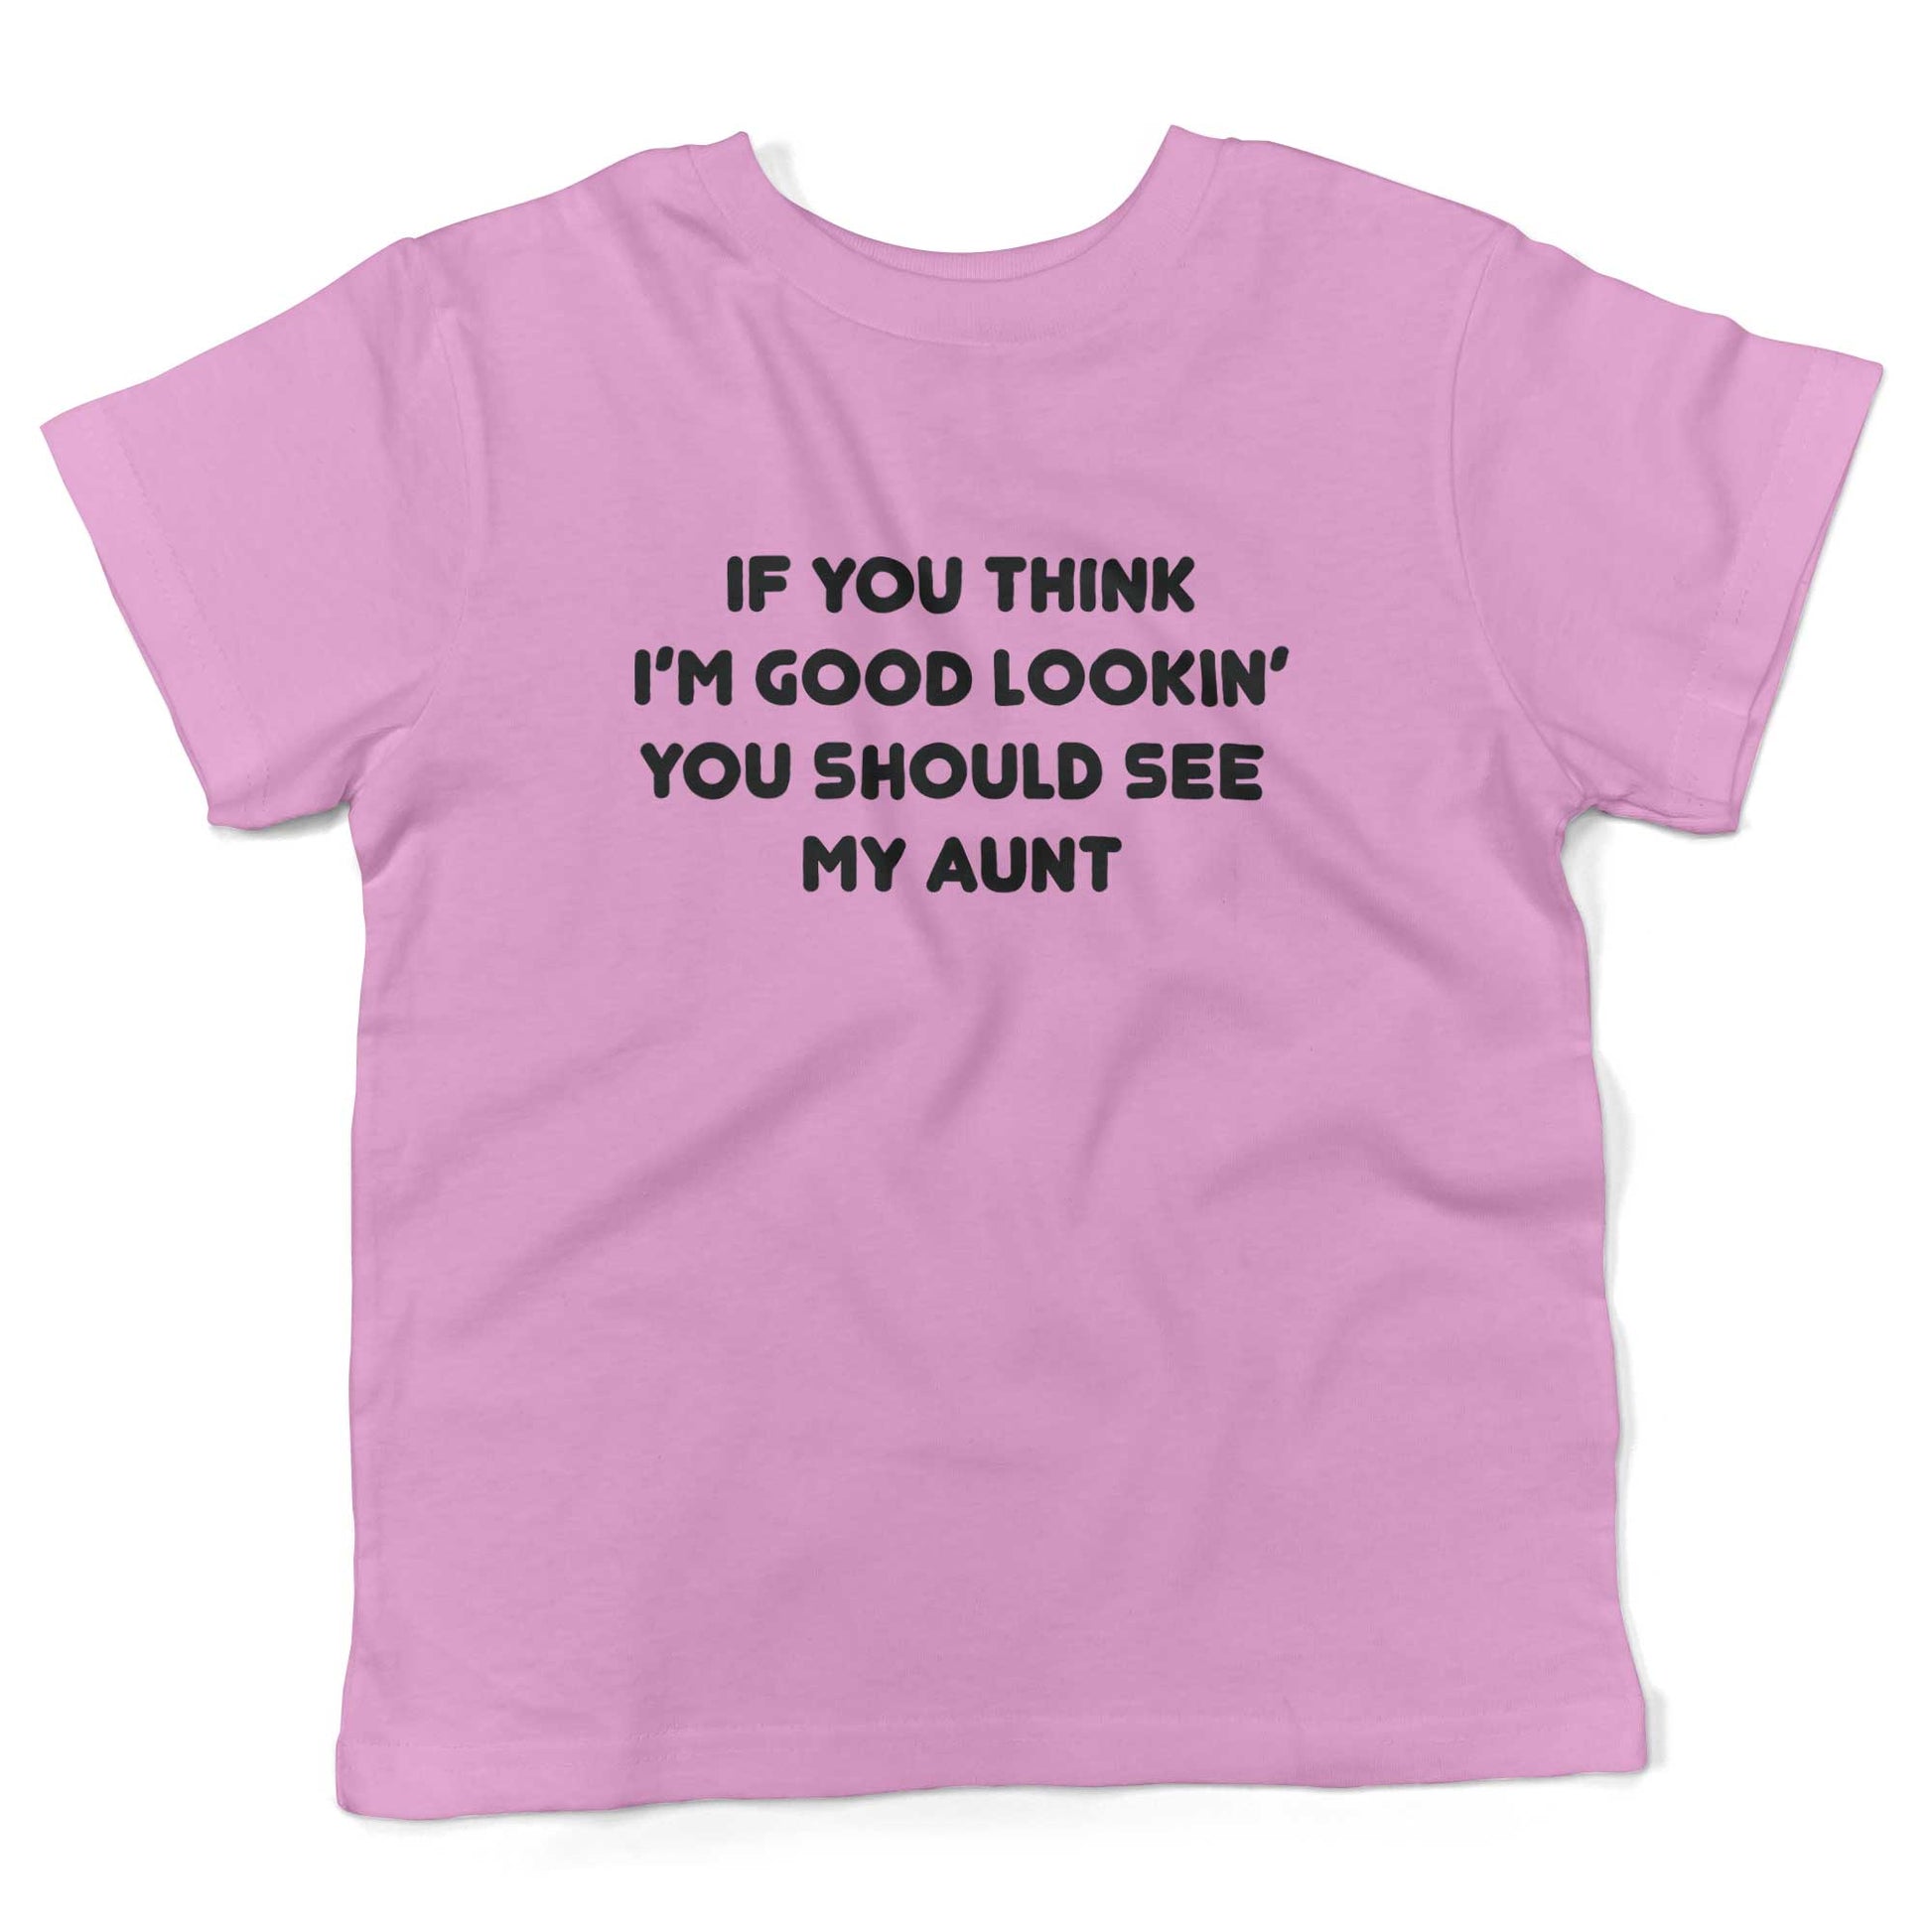 If You Think I'm Good Lookin' You Should See My Aunt Toddler Shirt-Organic Pink-2T